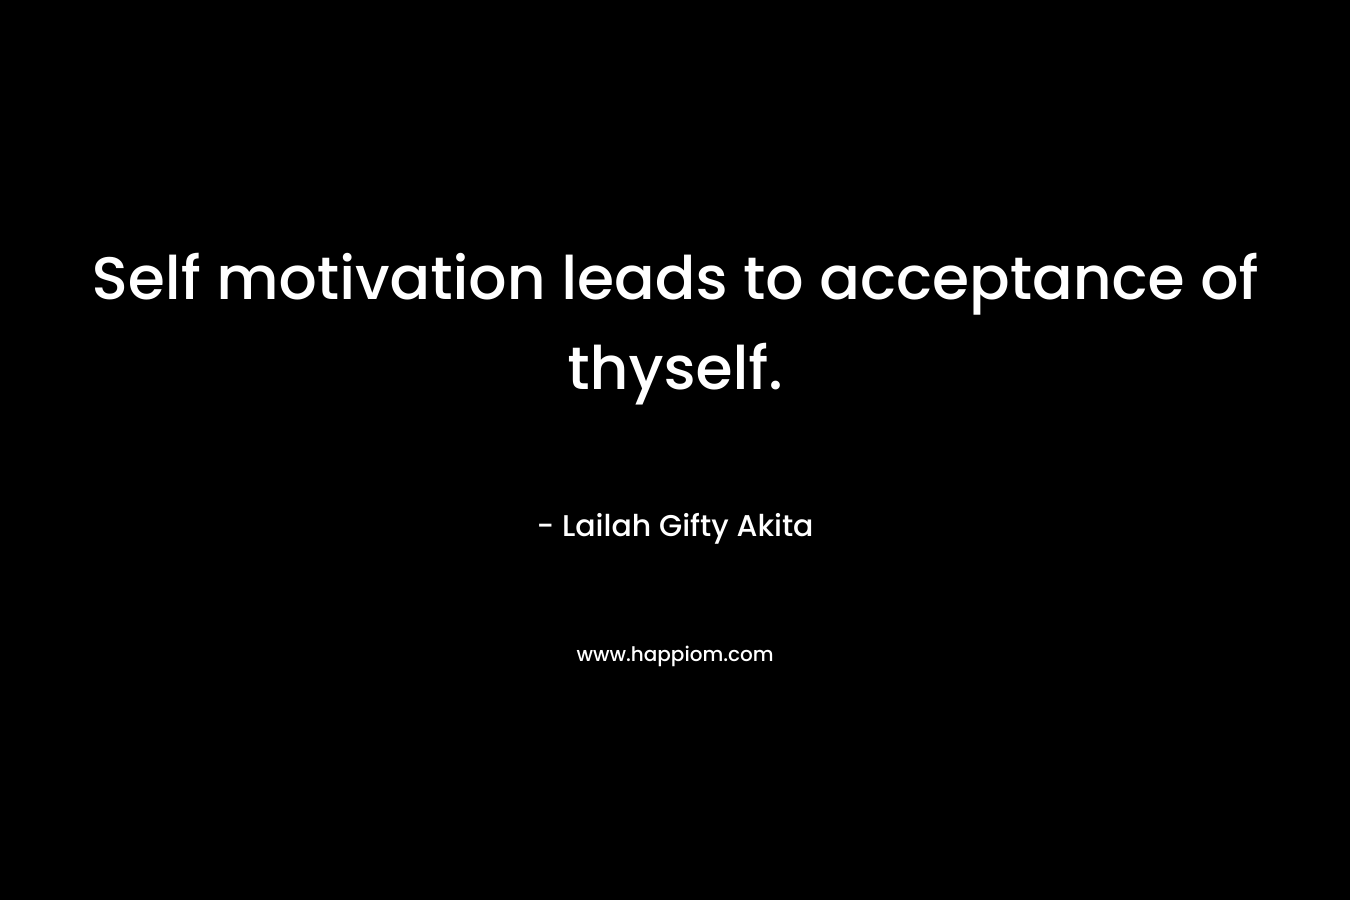 Self motivation leads to acceptance of thyself.